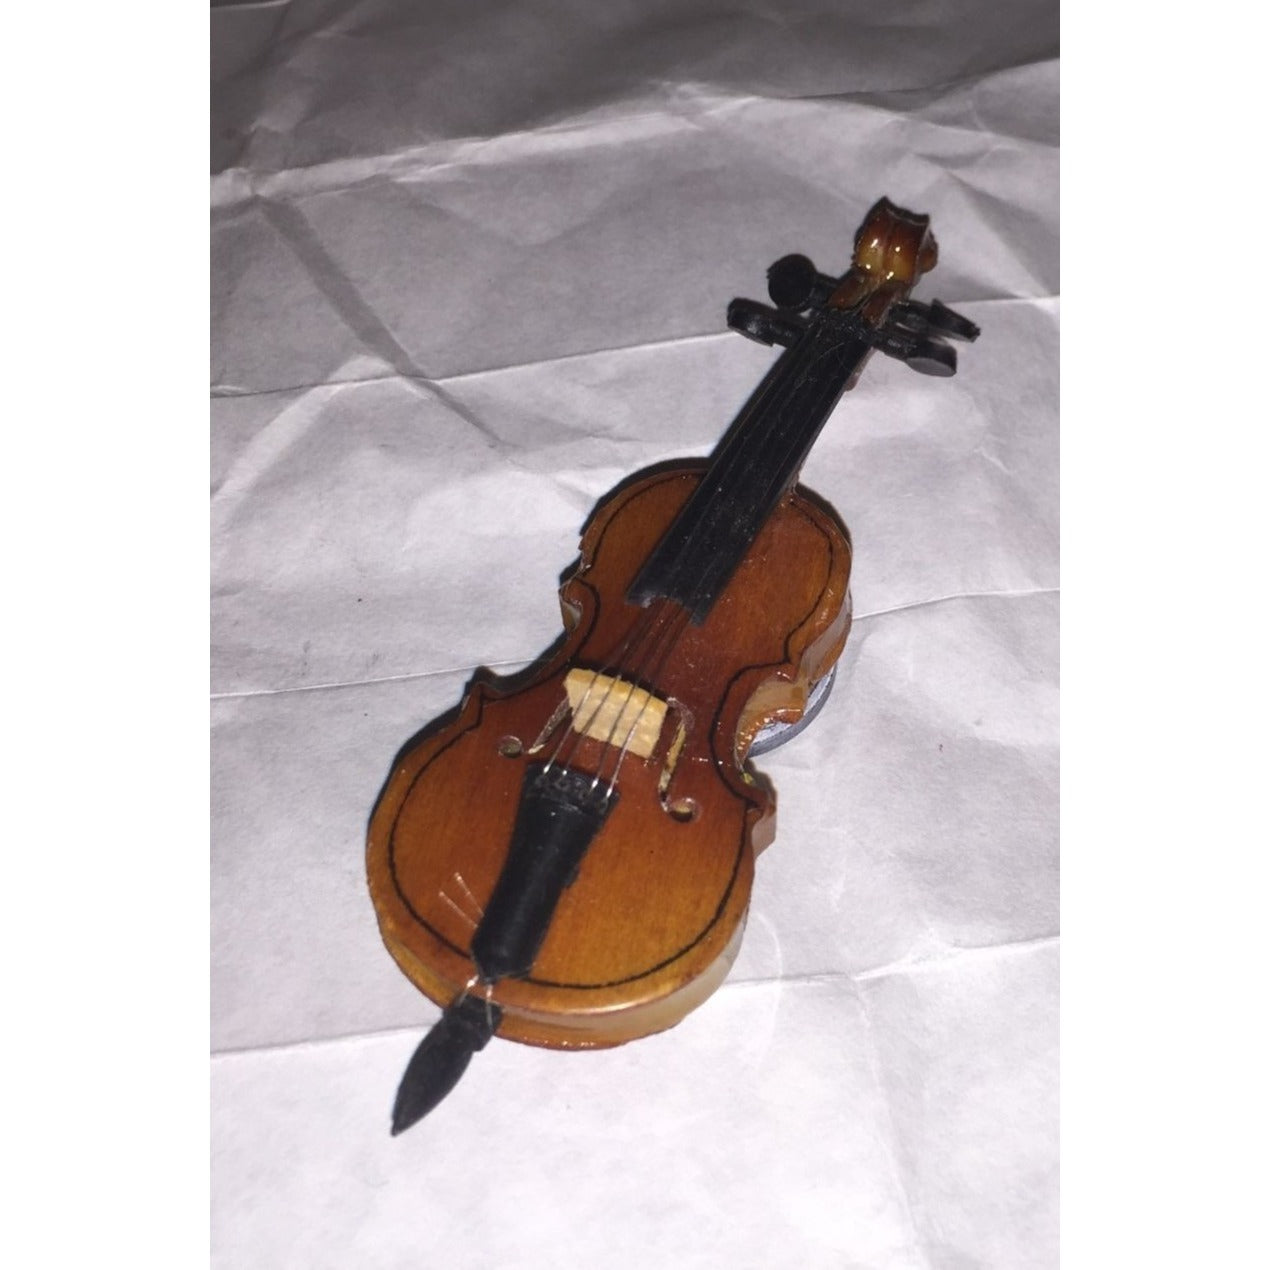 Vintage Miniature Wooden Instrument Magnets- Violin and Piano